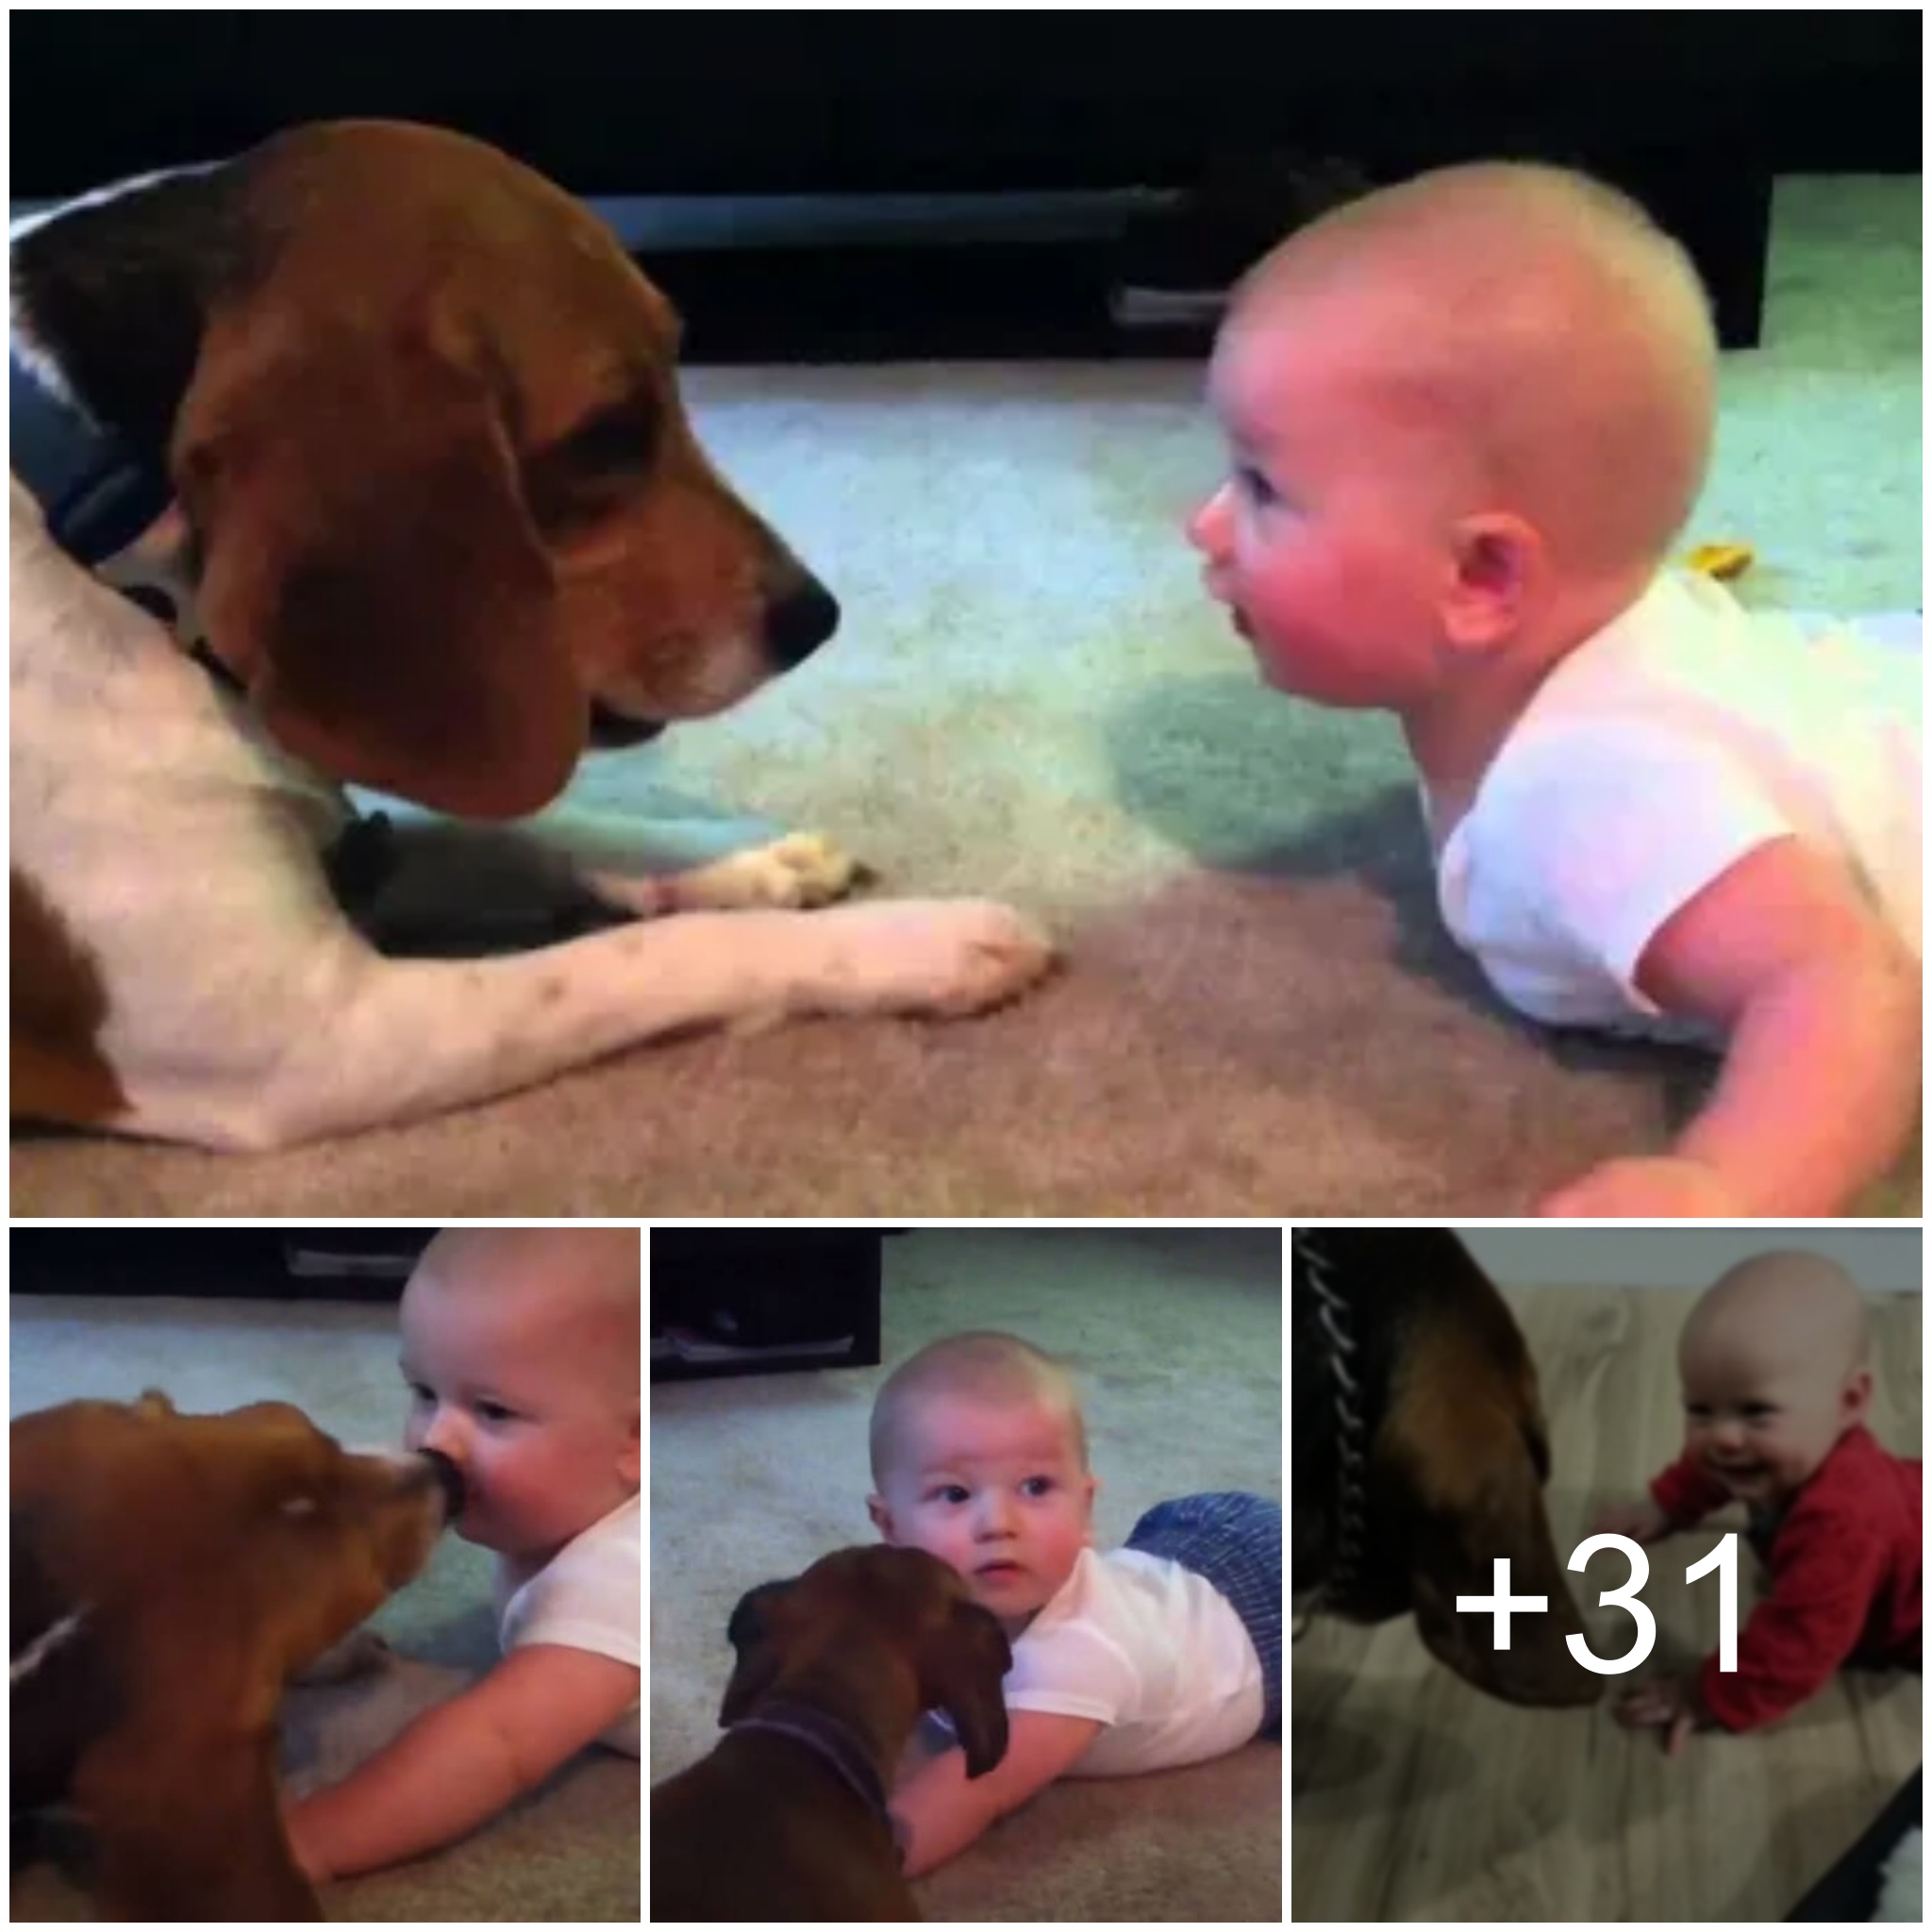 The pet dog acts as a nanny to take care of the baby when the parents are away, playing and practicing talking with the little owner